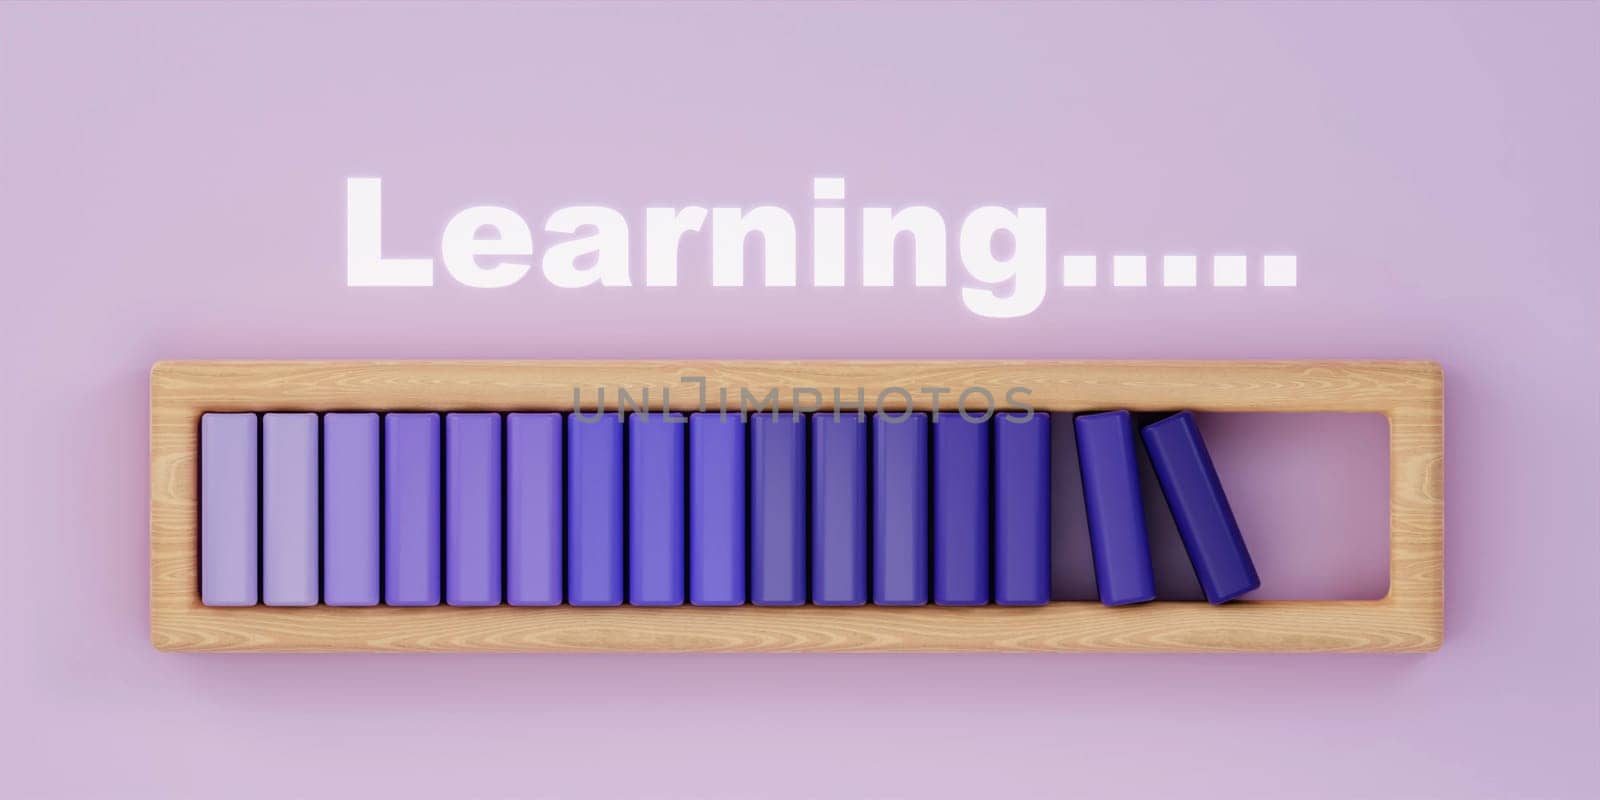 3d loading bar with books on a shelf with the word LEARNING. concept of learning process, education and back to school. 3d rendering by meepiangraphic